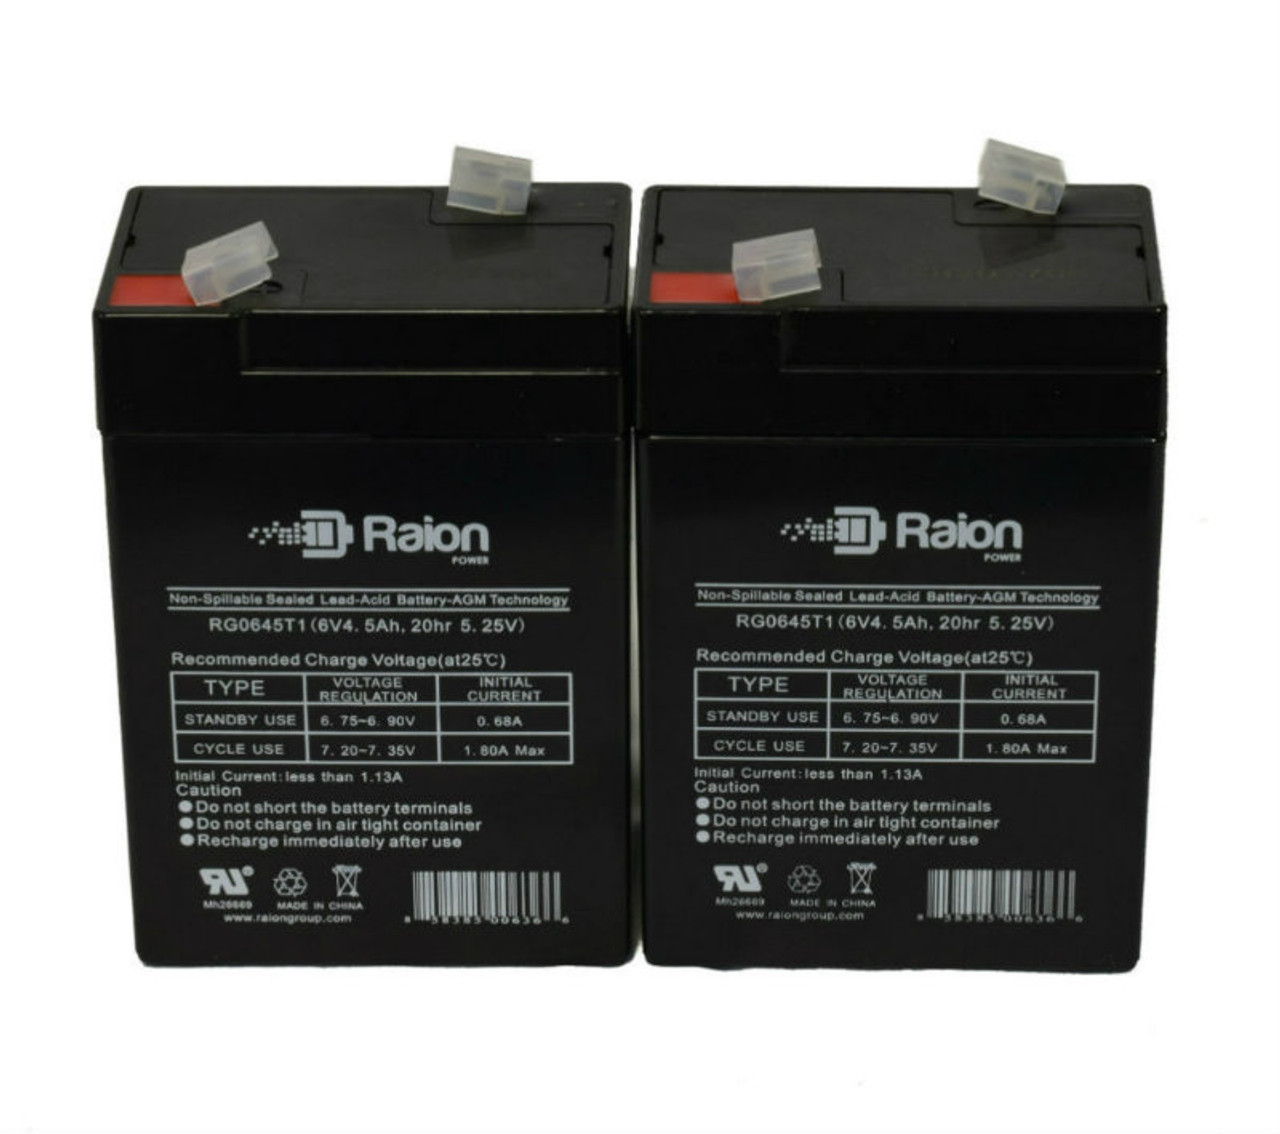 Raion Power 6V 4.5Ah Replacement Emergency Light Battery for Sure-Lites LM1 - 2 Pack